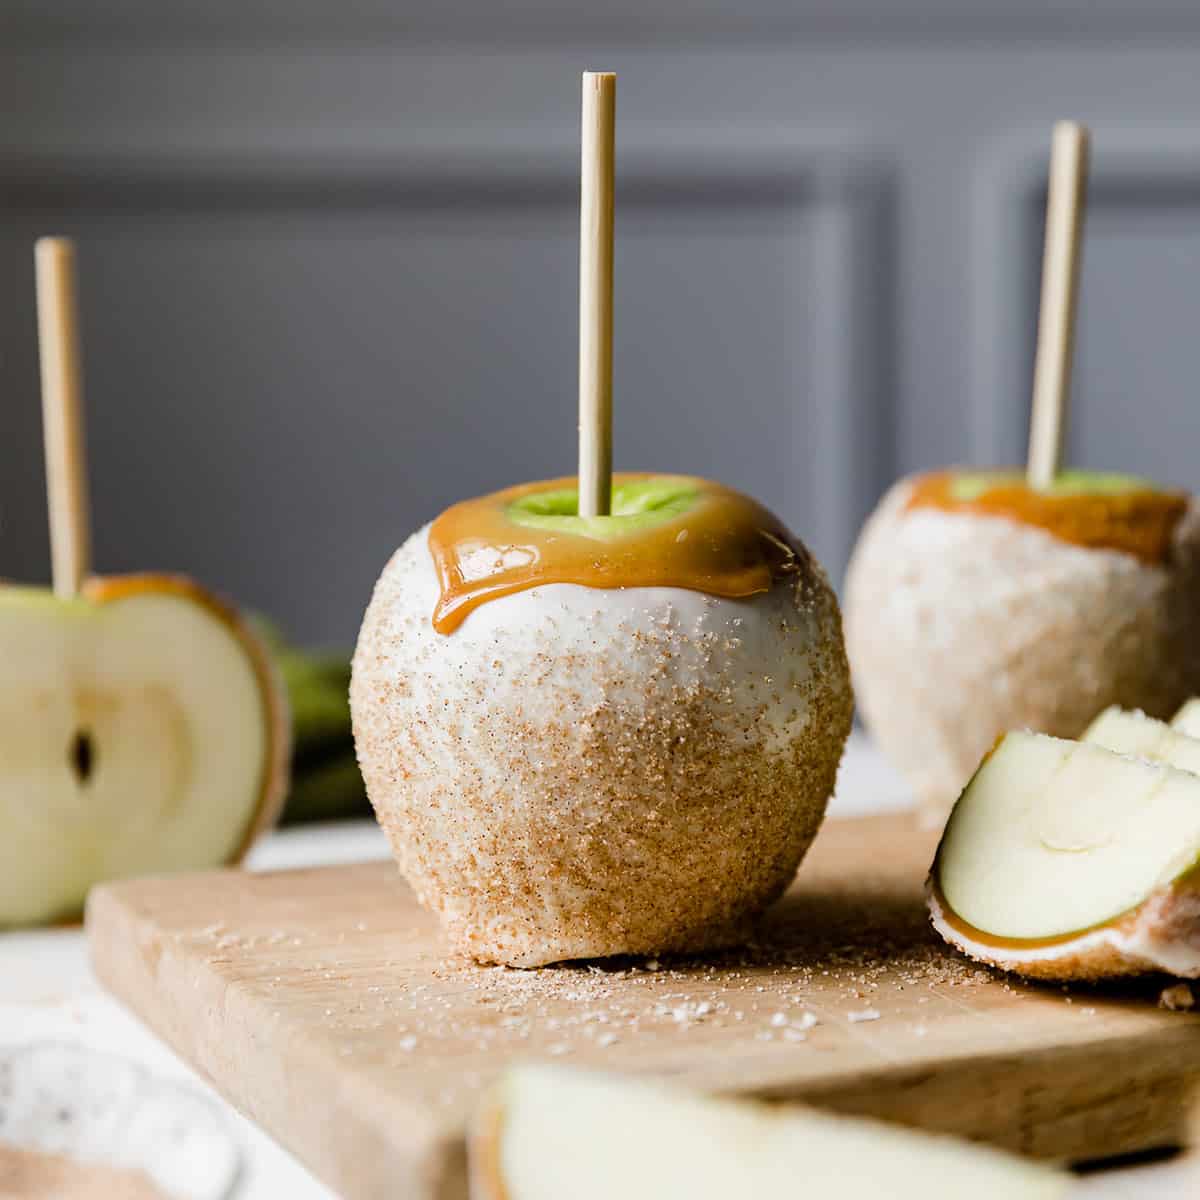 A white chocolate and caramel dipped Rocky Mountain Apple Pie Caramel Apple against a light gray background.